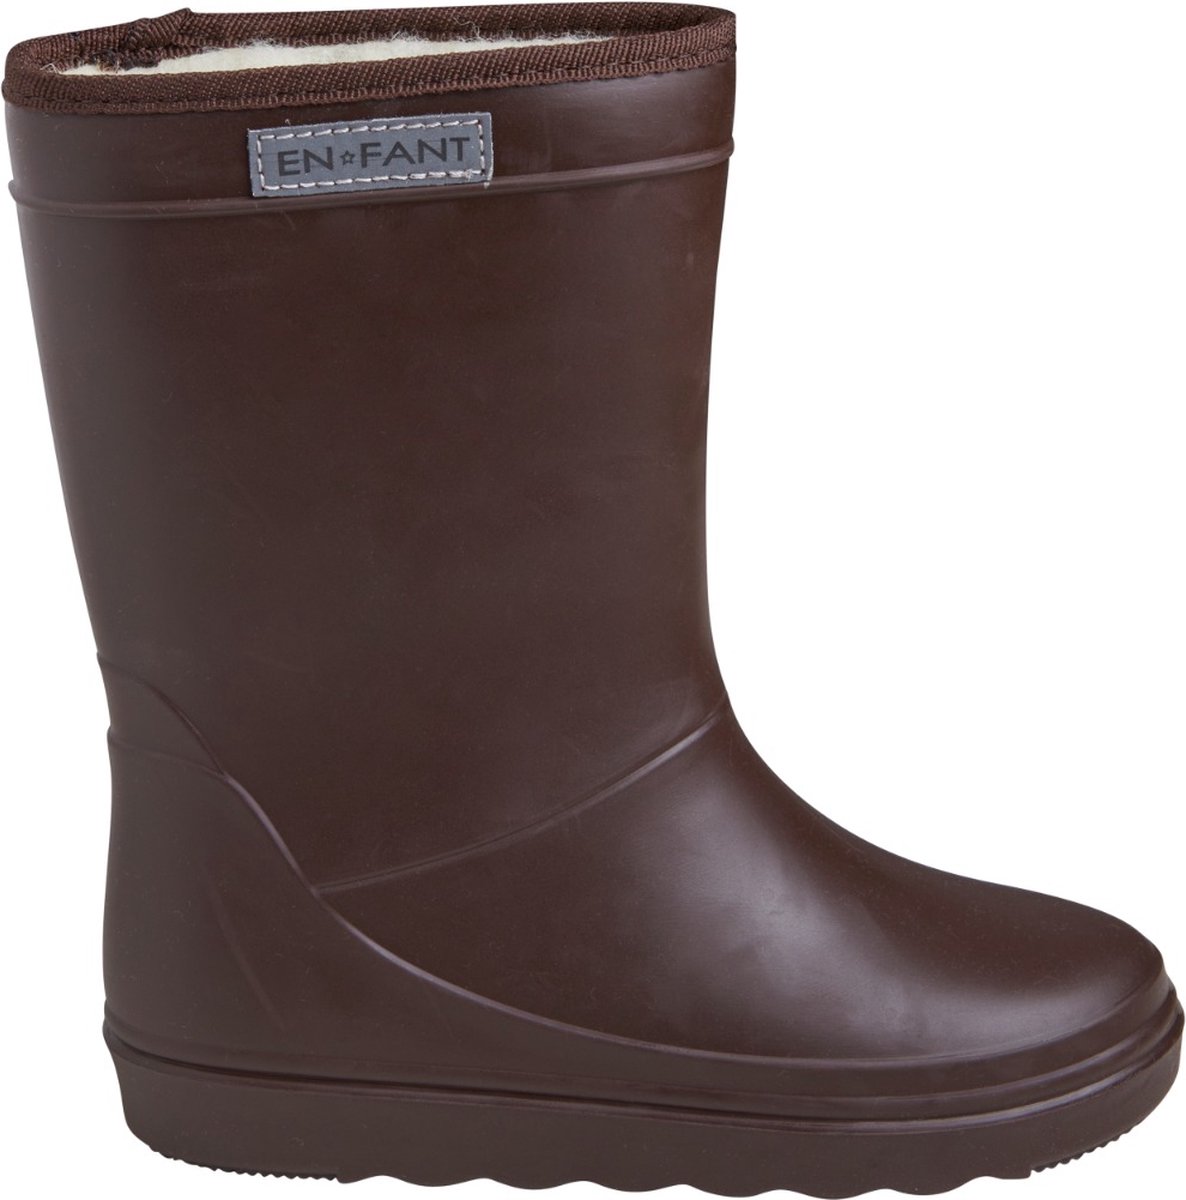 ENFANT THERMOBOOTS COFFEE BEAN-30